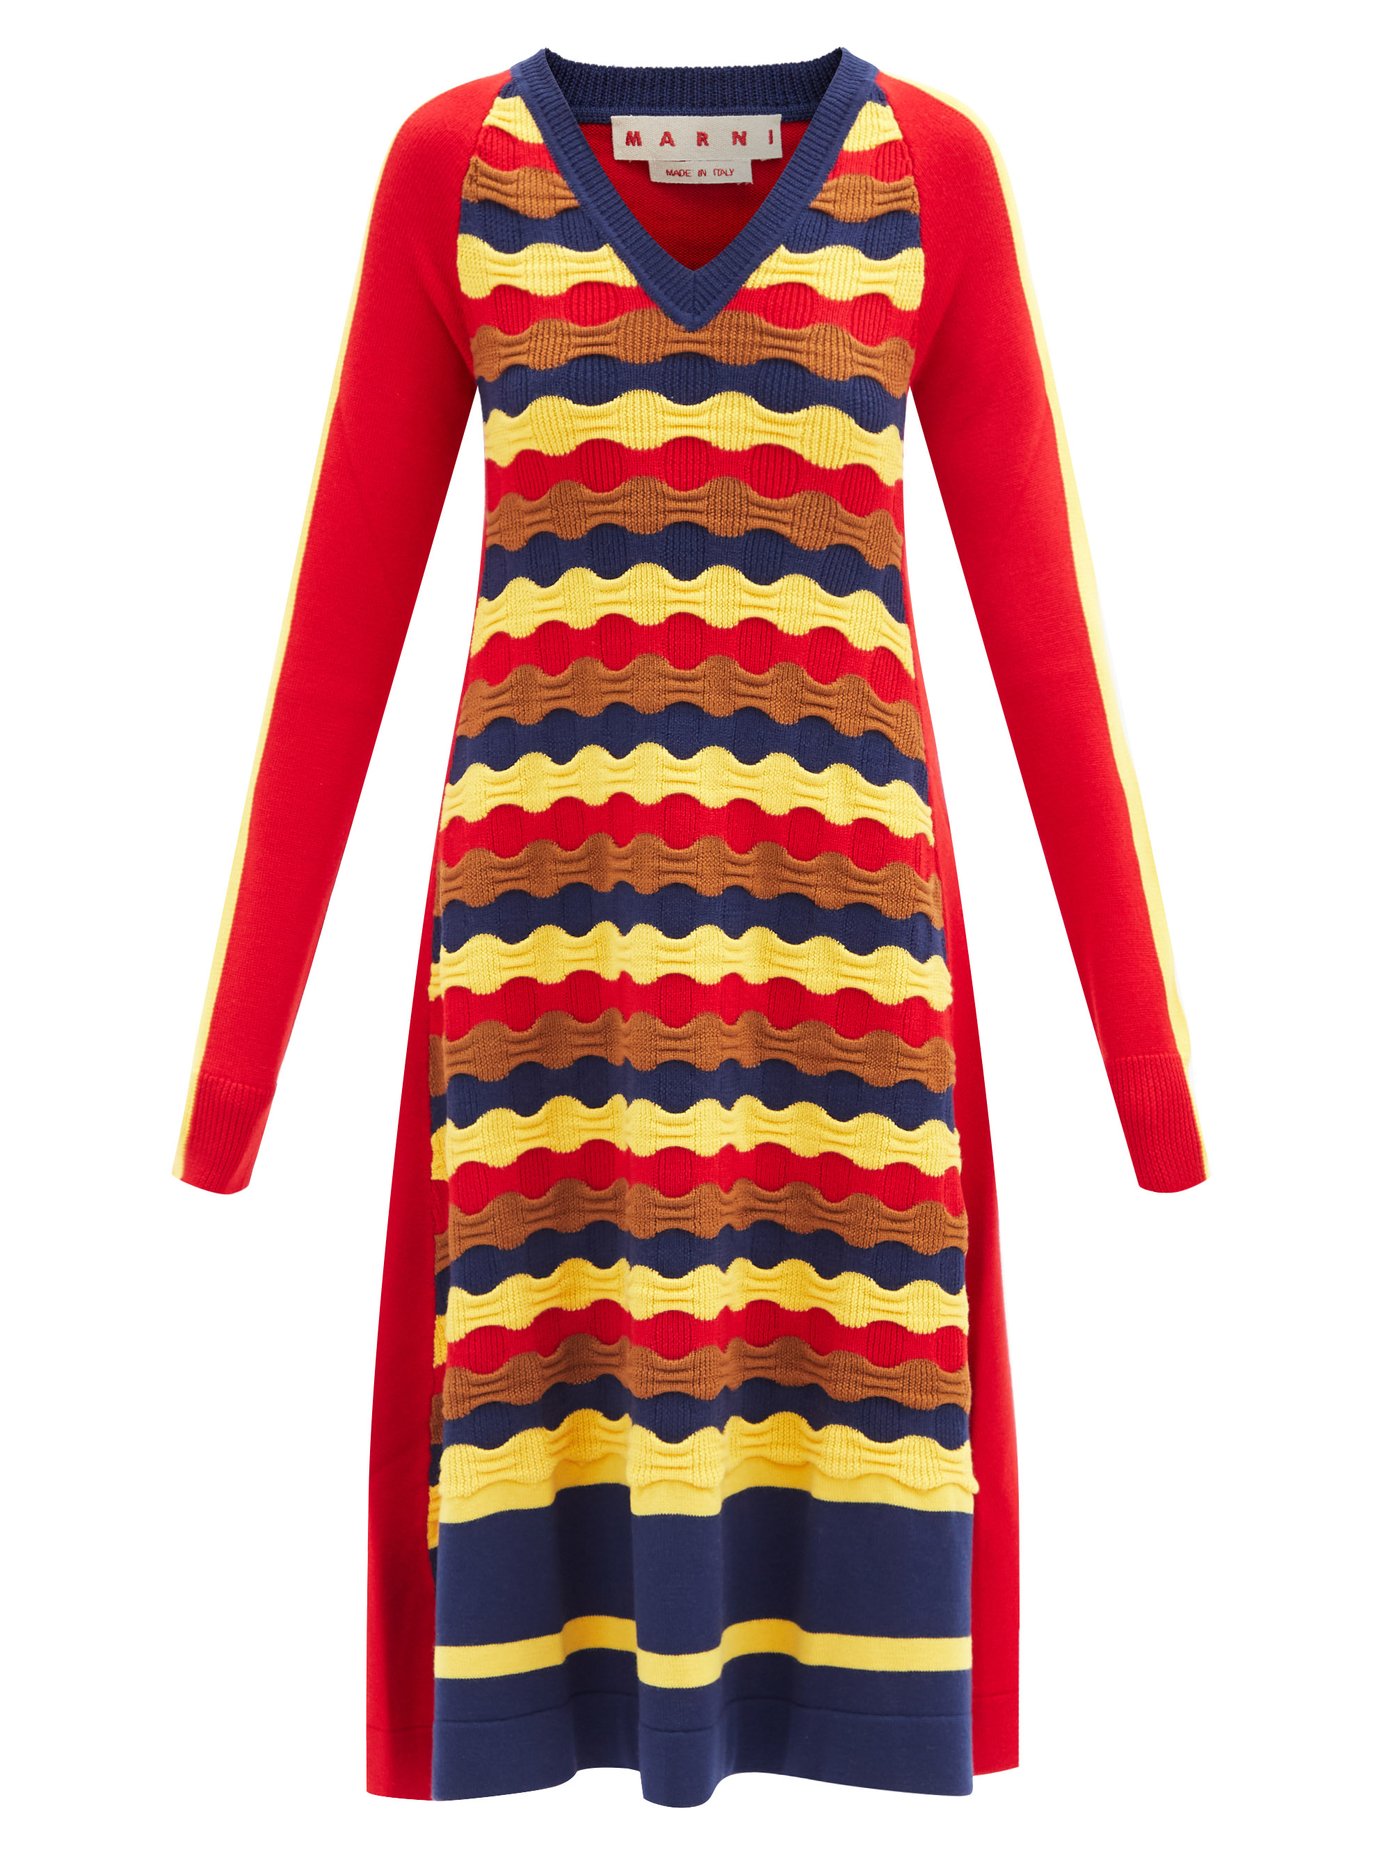 red knitted dress uk